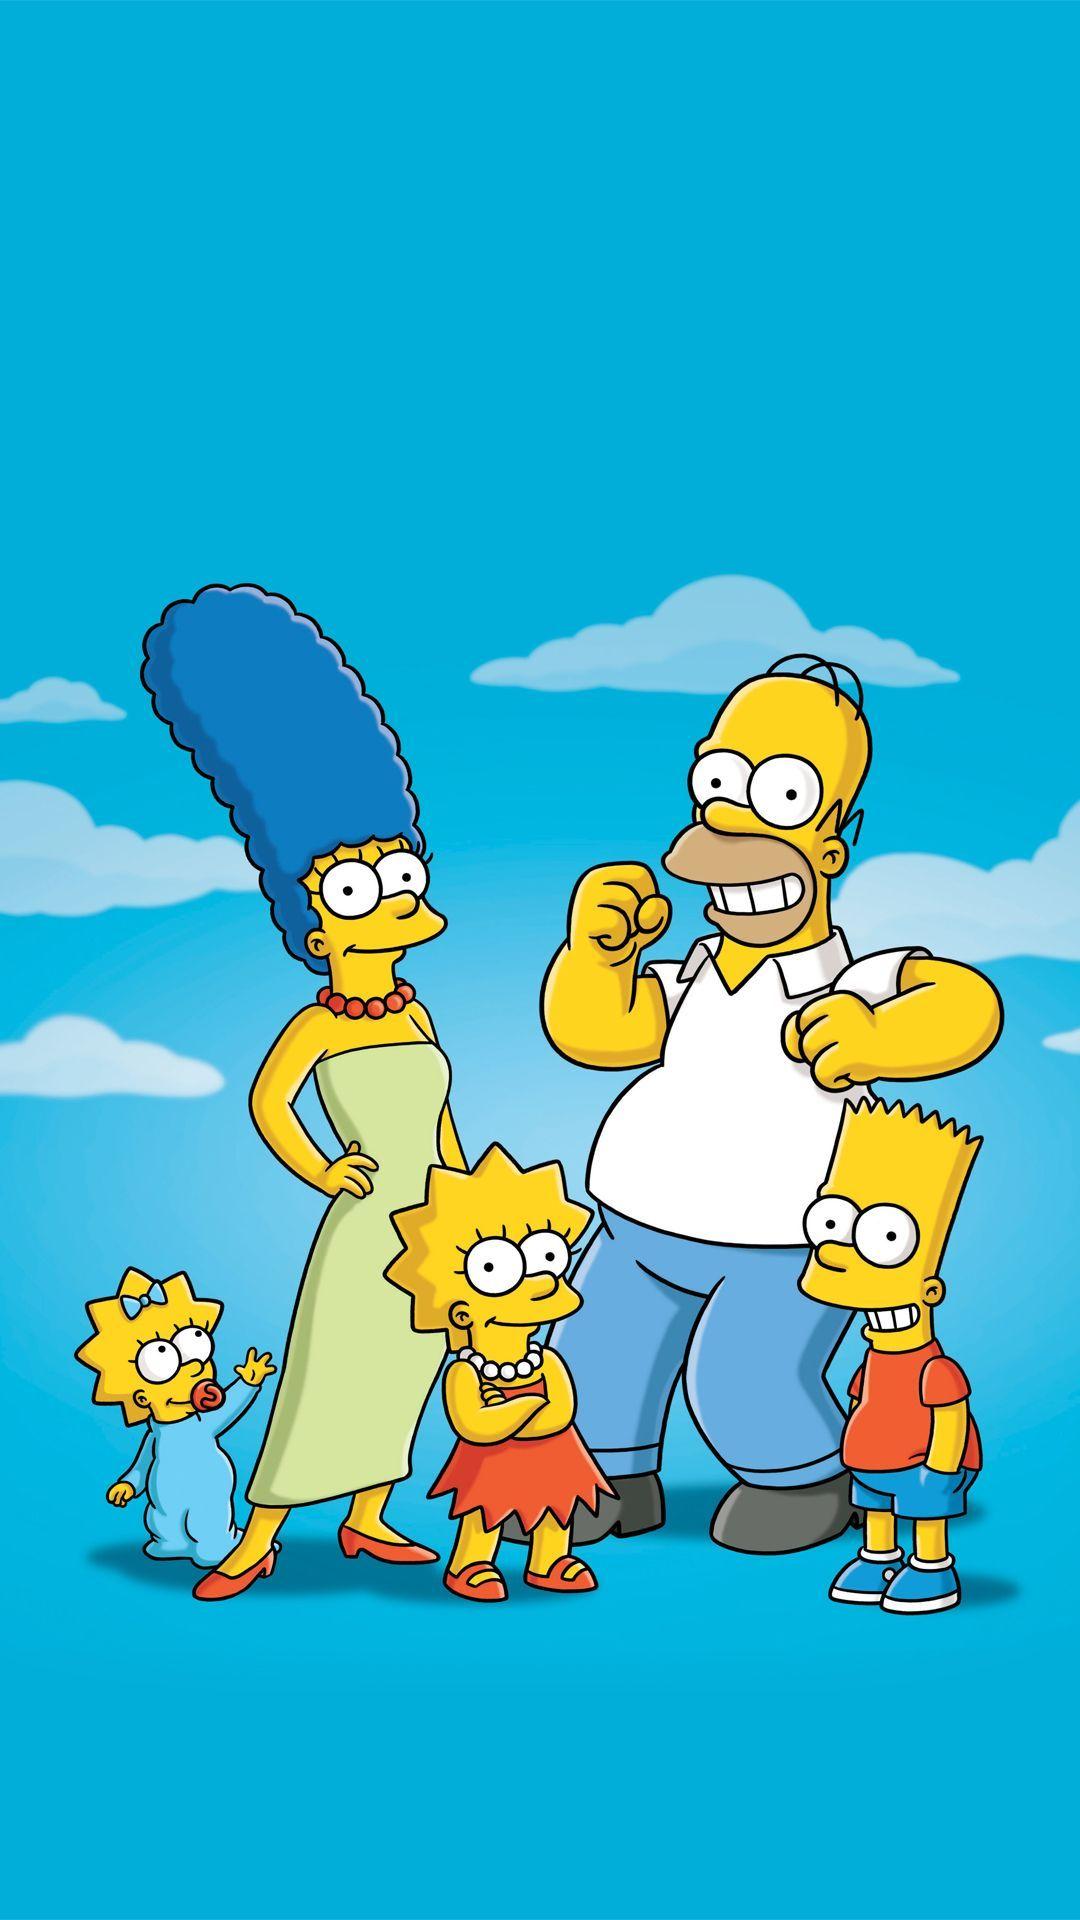 The Simpsons Family Funny HD Wallpaper for iPhone 6 is a fantastic